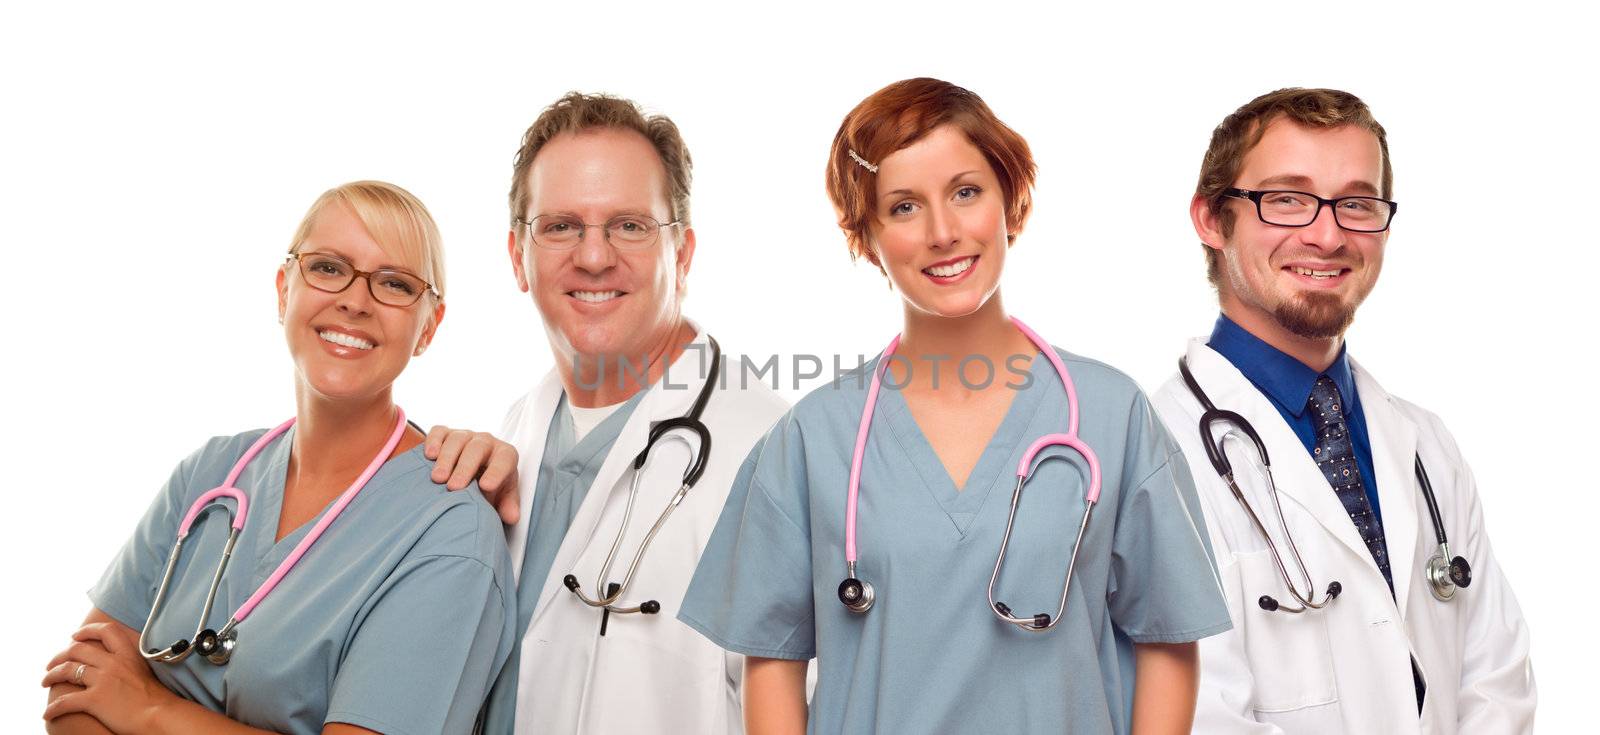 Group of Doctors or Nurses Isolated on a White Background.